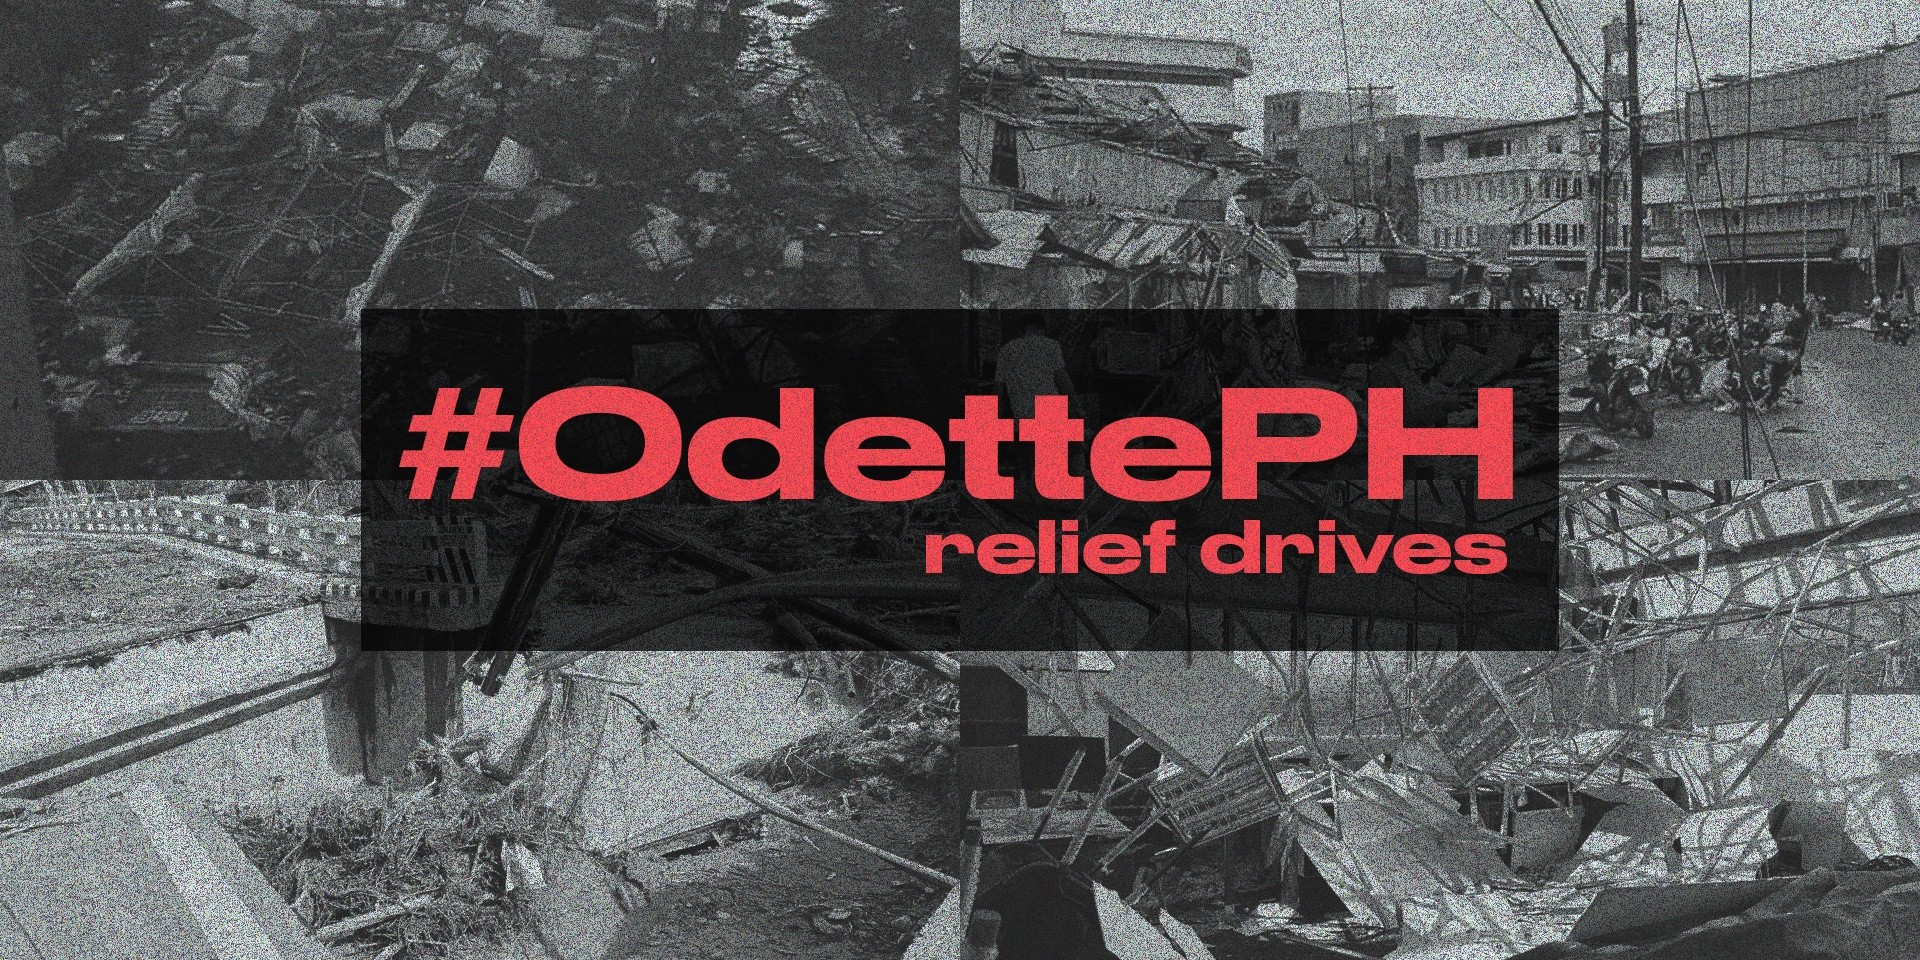 Here's how you can donate to Odette PH relief drives